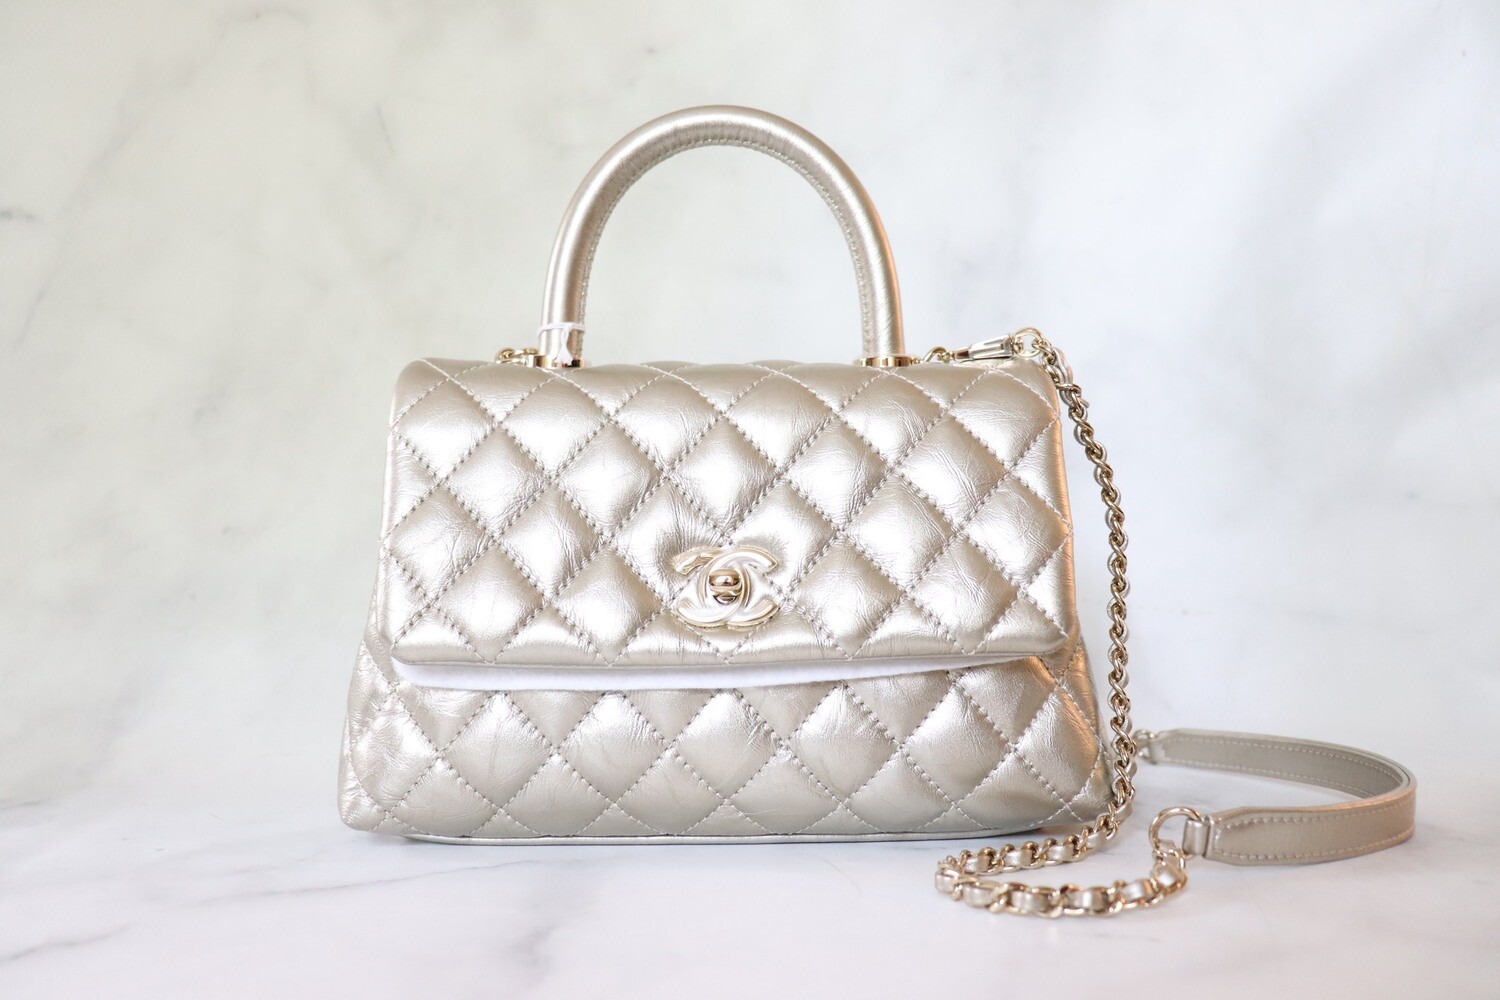 Chanel Fashion Therapy Small Flap Bag, Beige Caviar Leather, Brushed Gold  Hardware, New in Box - Julia Rose Boston